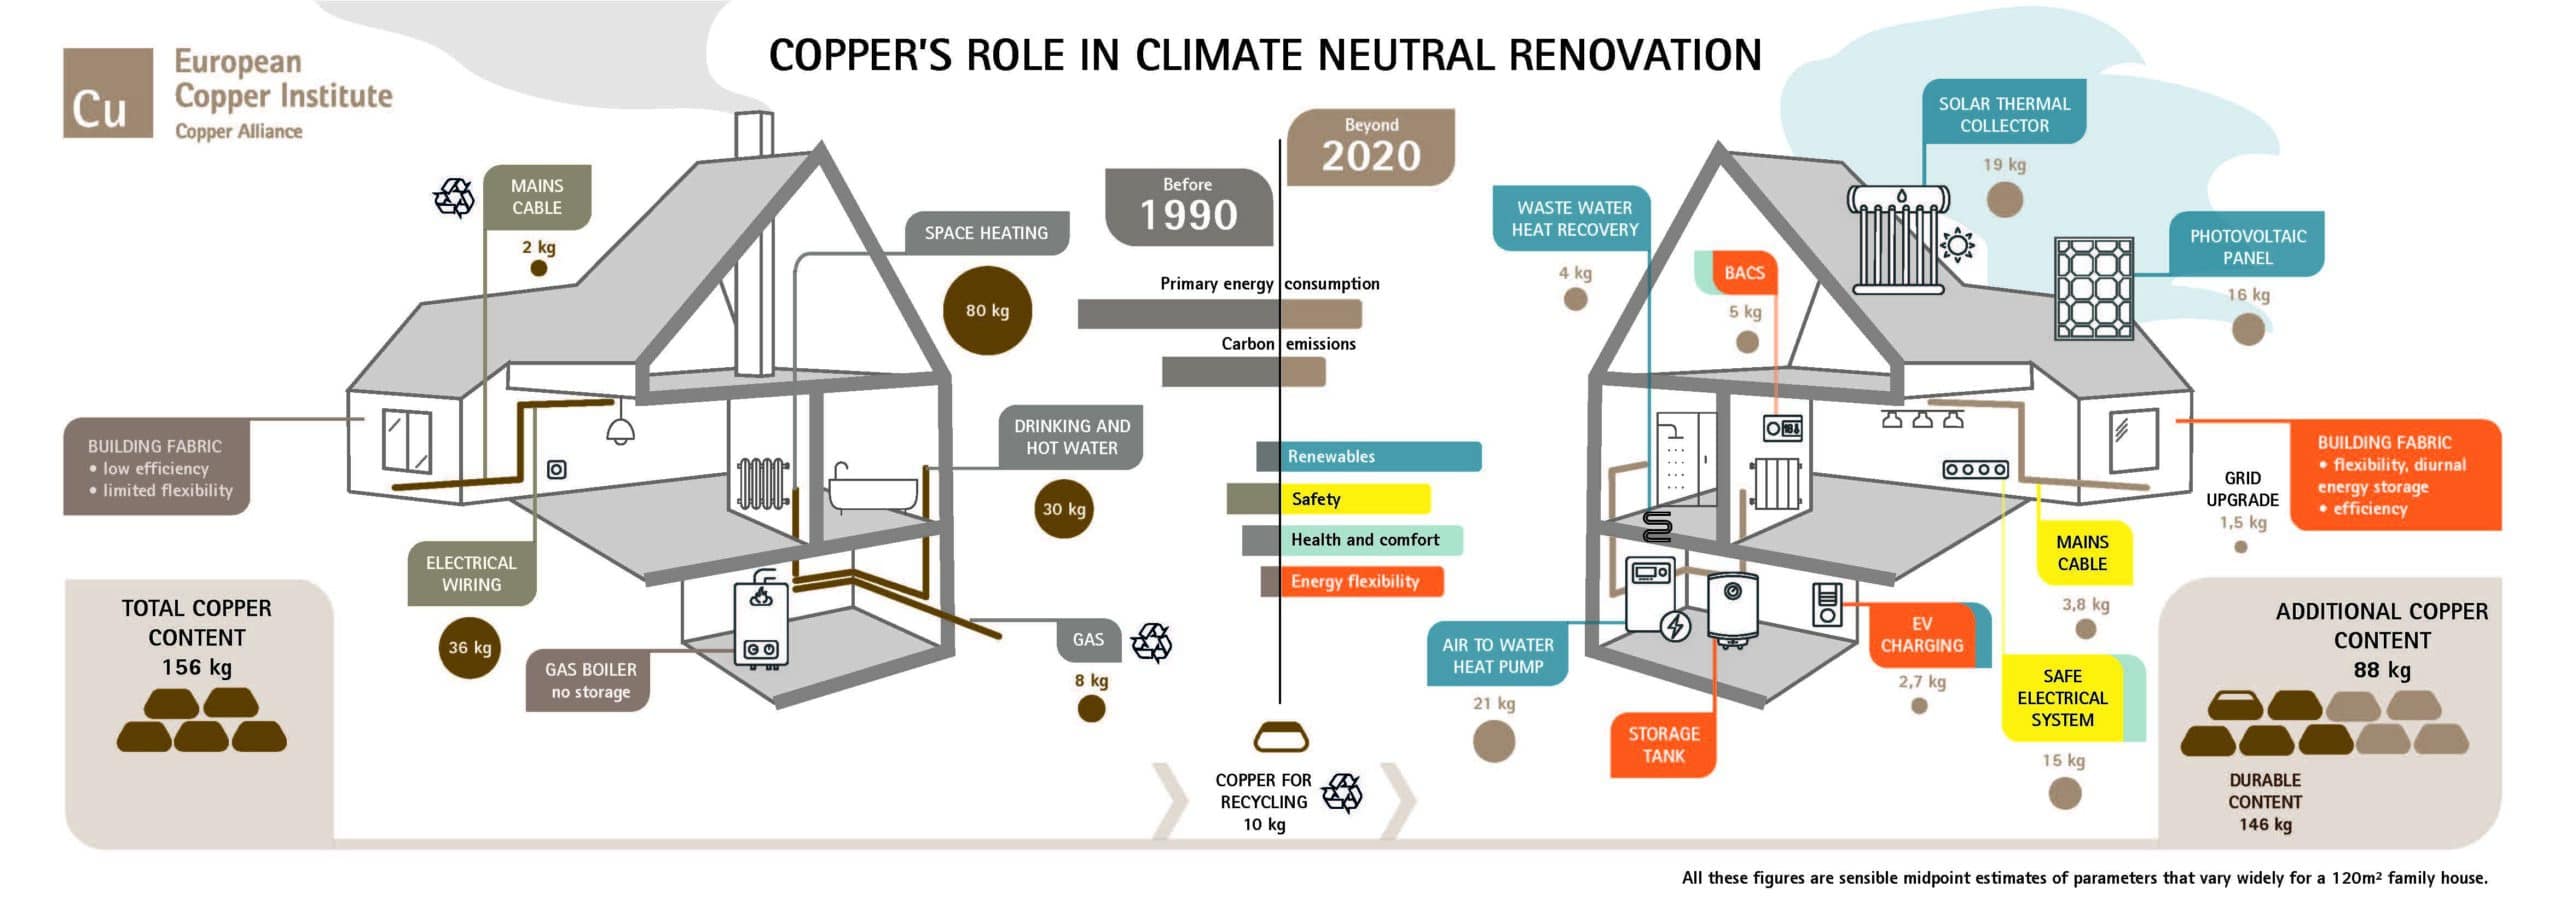 coppers-role-in-climate-neutral-renovation (1)